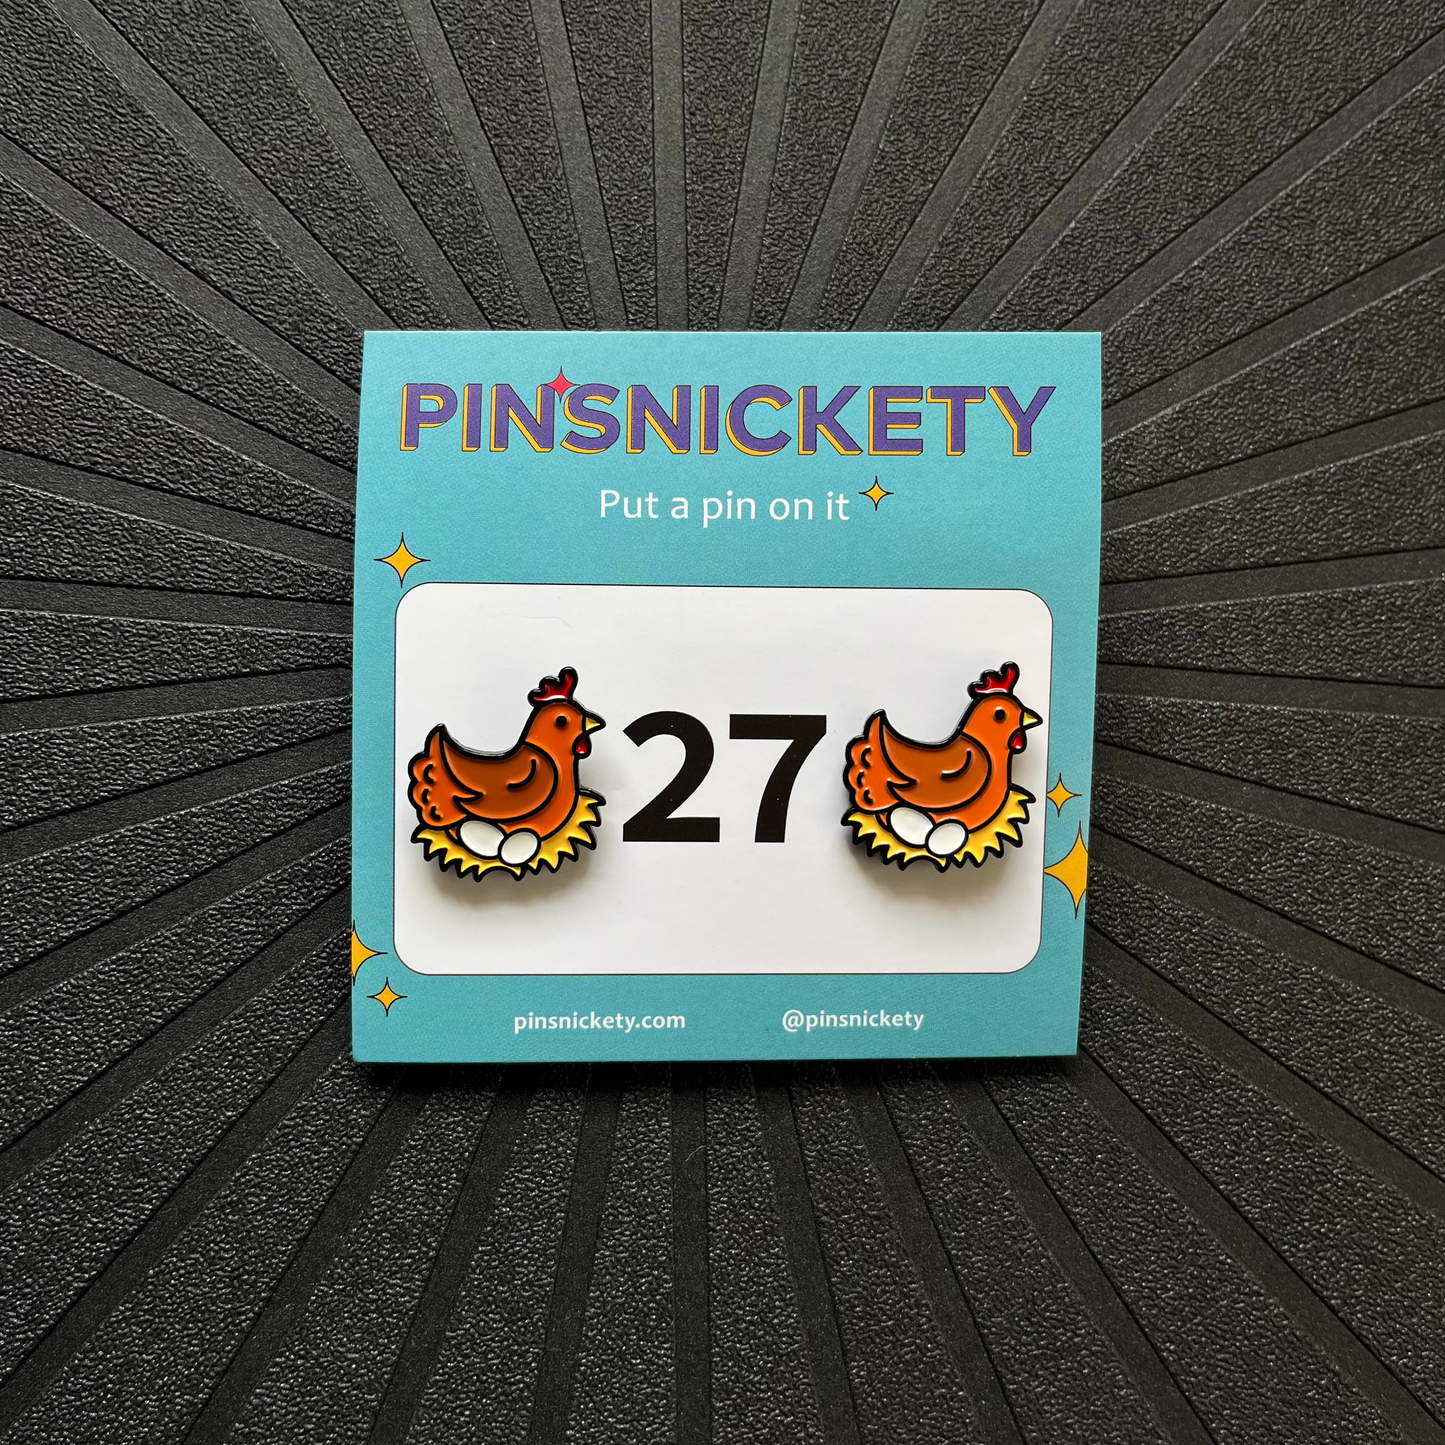 pinsnickety chicken horse show number pins on their product packaging card